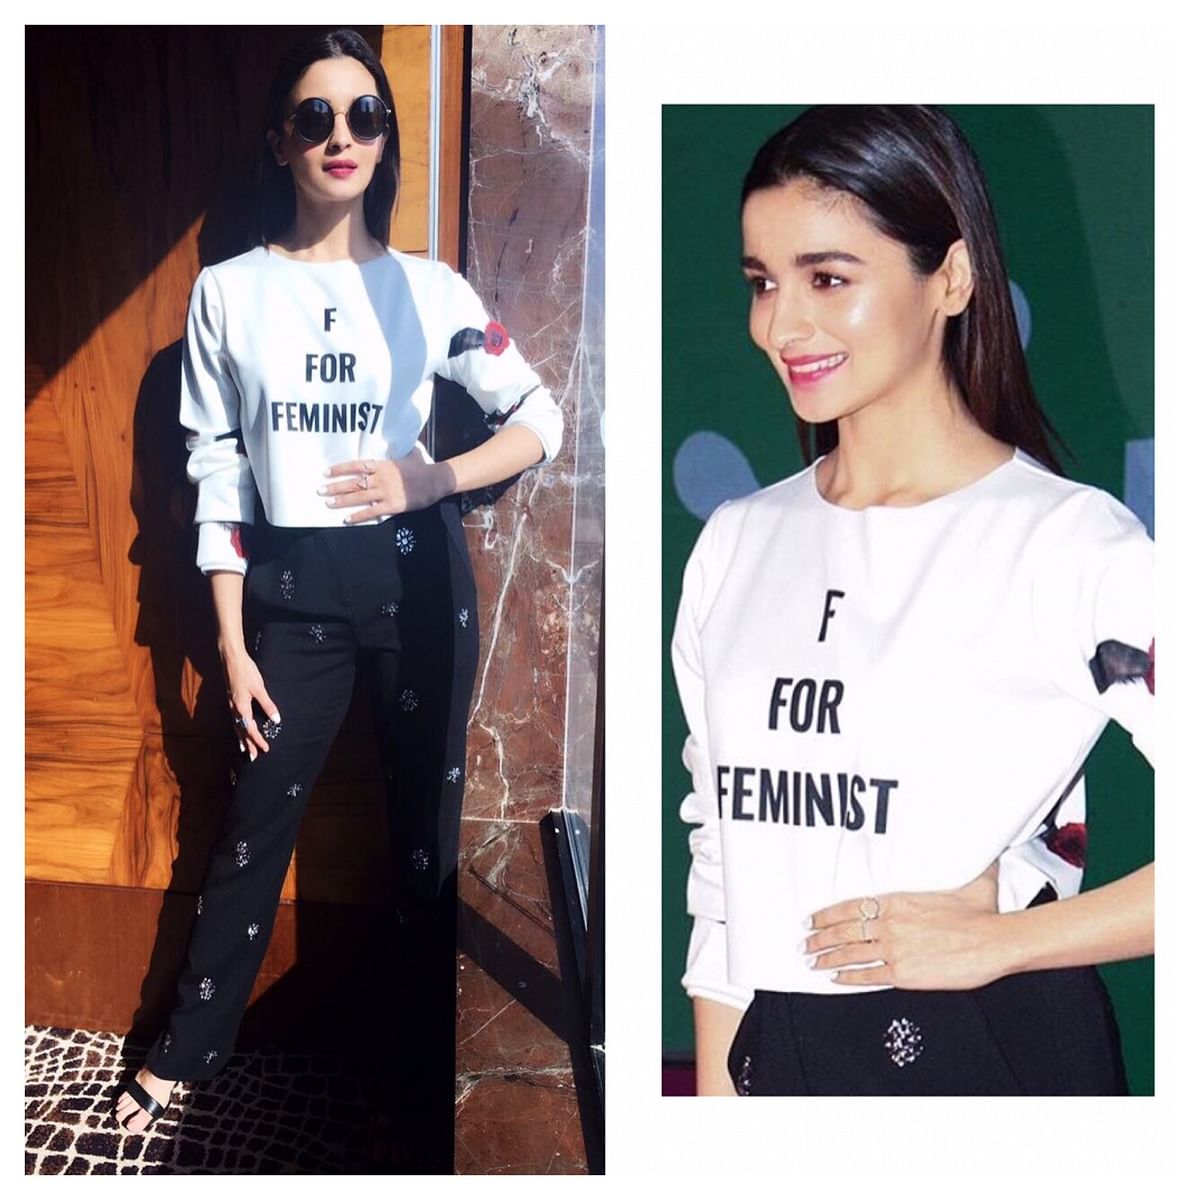 
















When
an Alia Bhatt wears an ‘F for Feminist’ tee, does it further the cause of feminism at all?